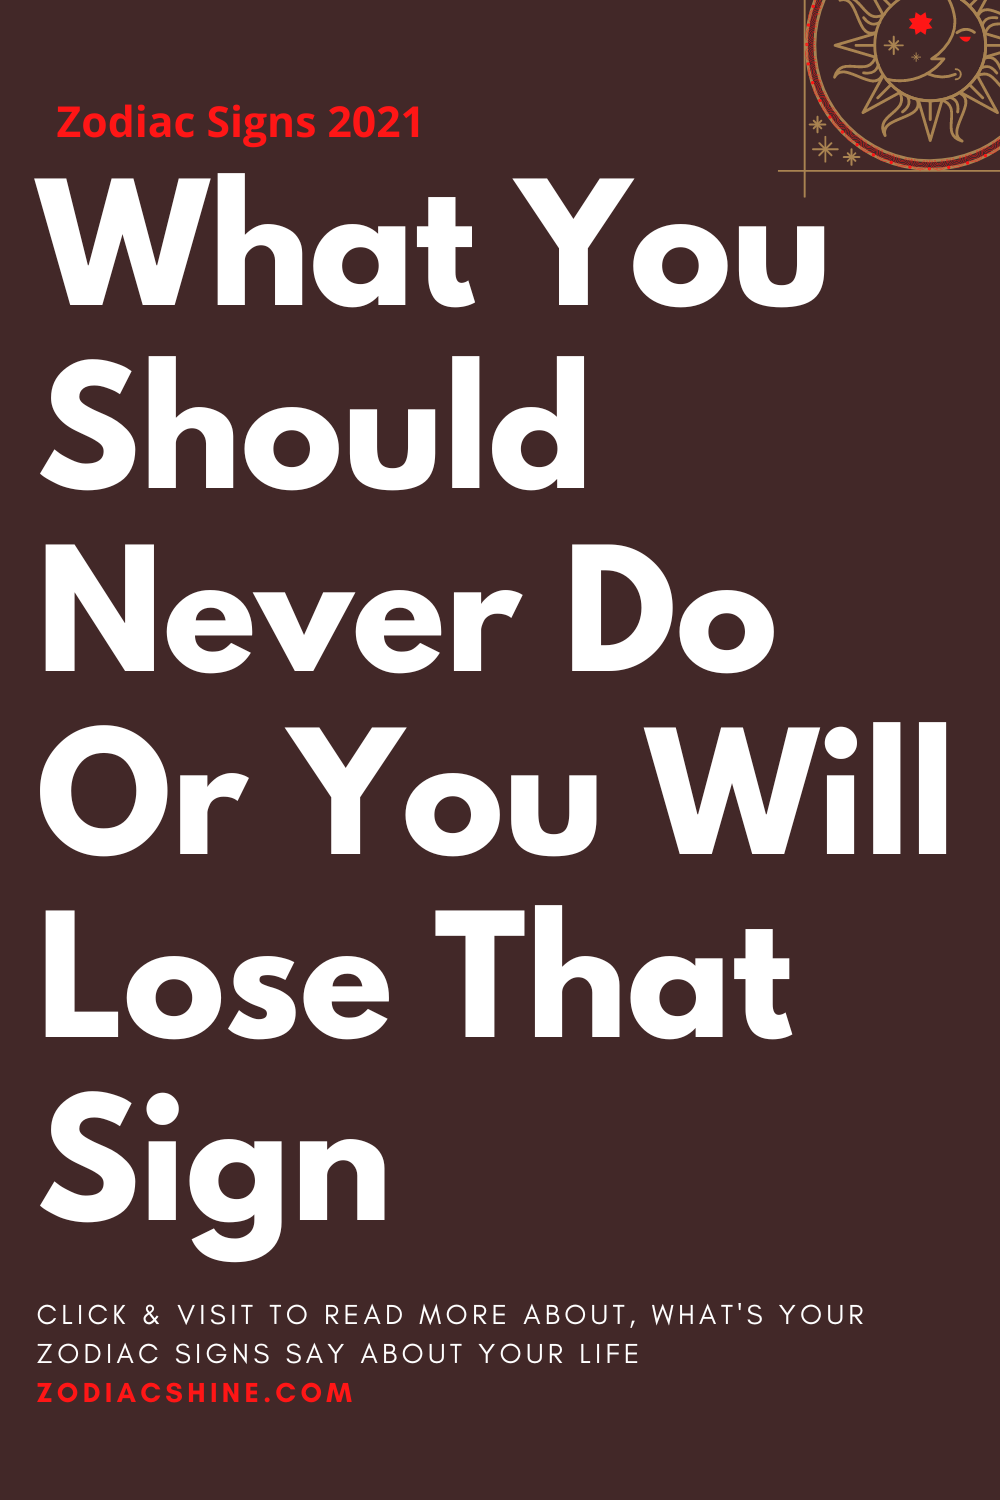 What You Should Never Do Or You Will Lose That Sign